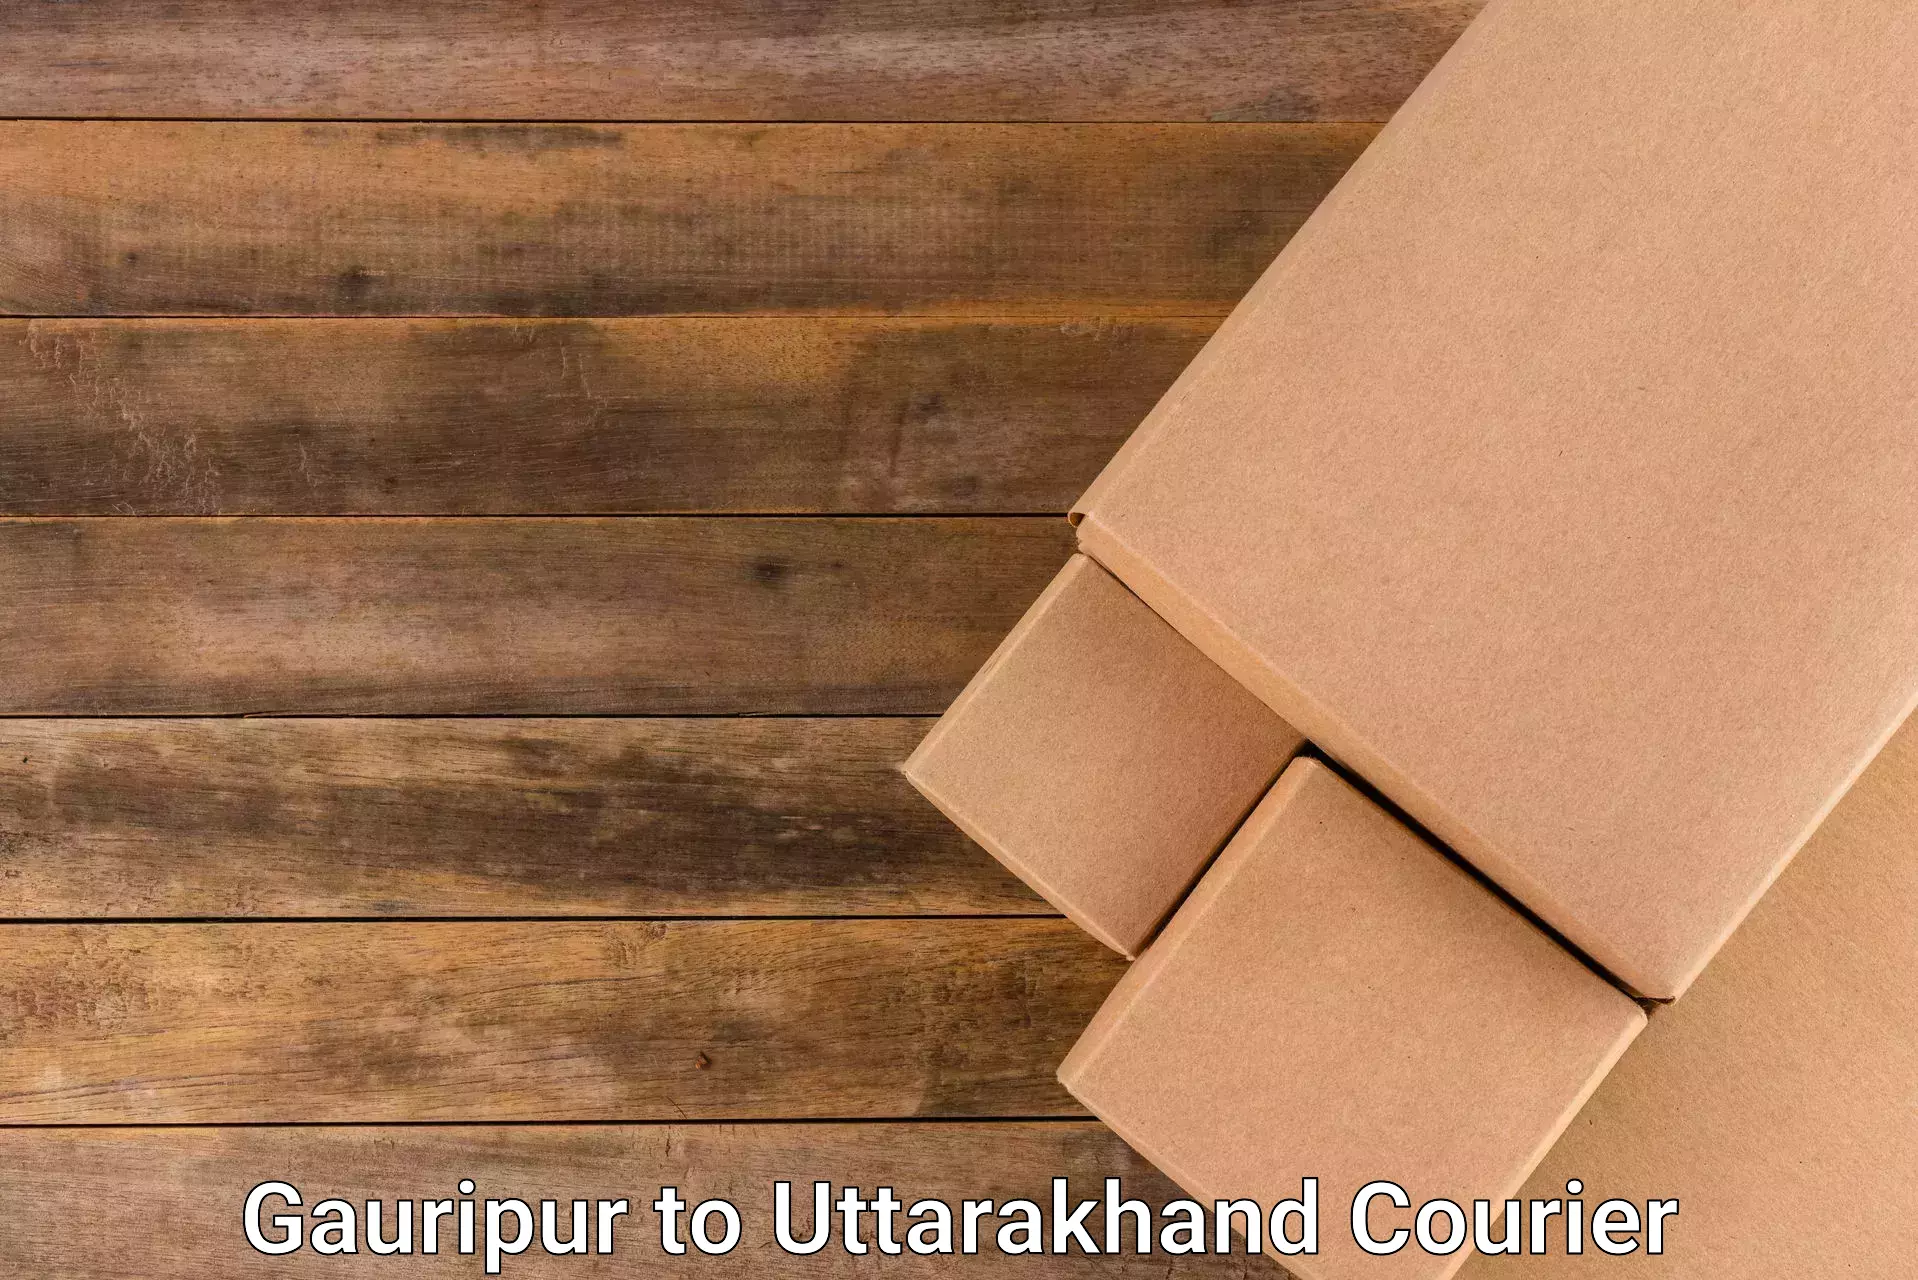 On-demand shipping options Gauripur to Mussoorie